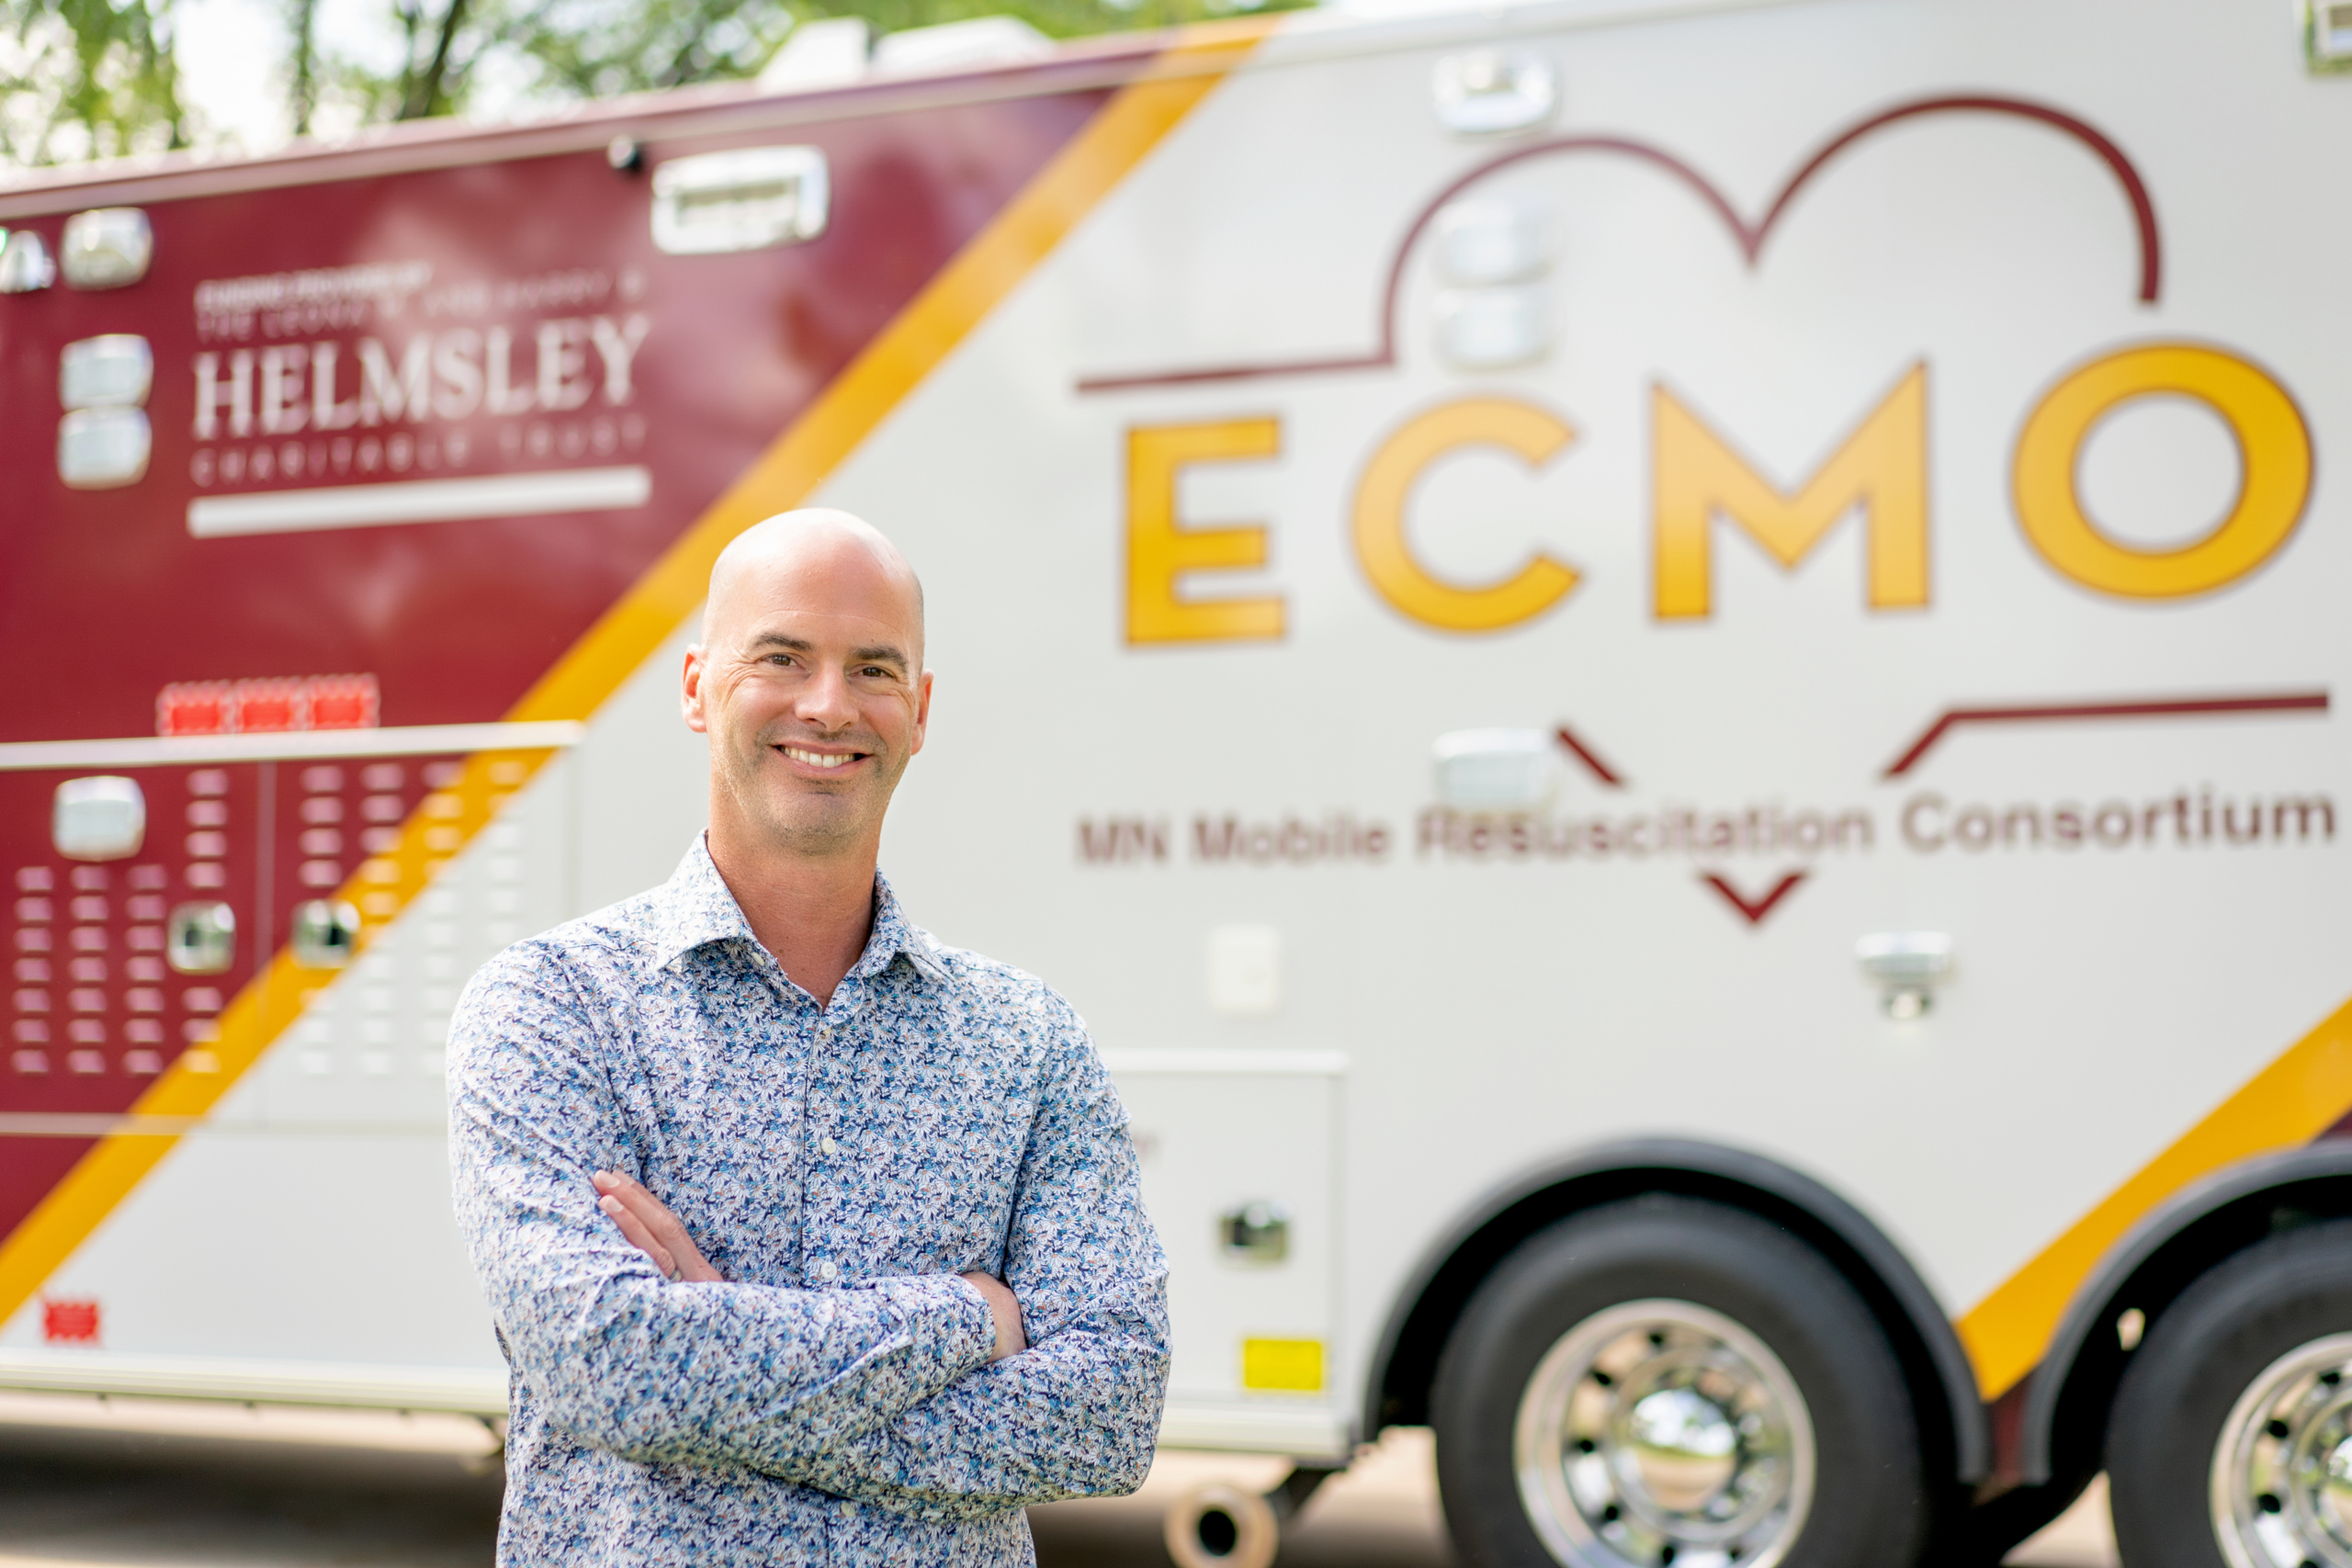 New York Times Magazine Profiles the Helmsley-Supported ECMO Truck and Work of Dr. Demetris Yannopoulos